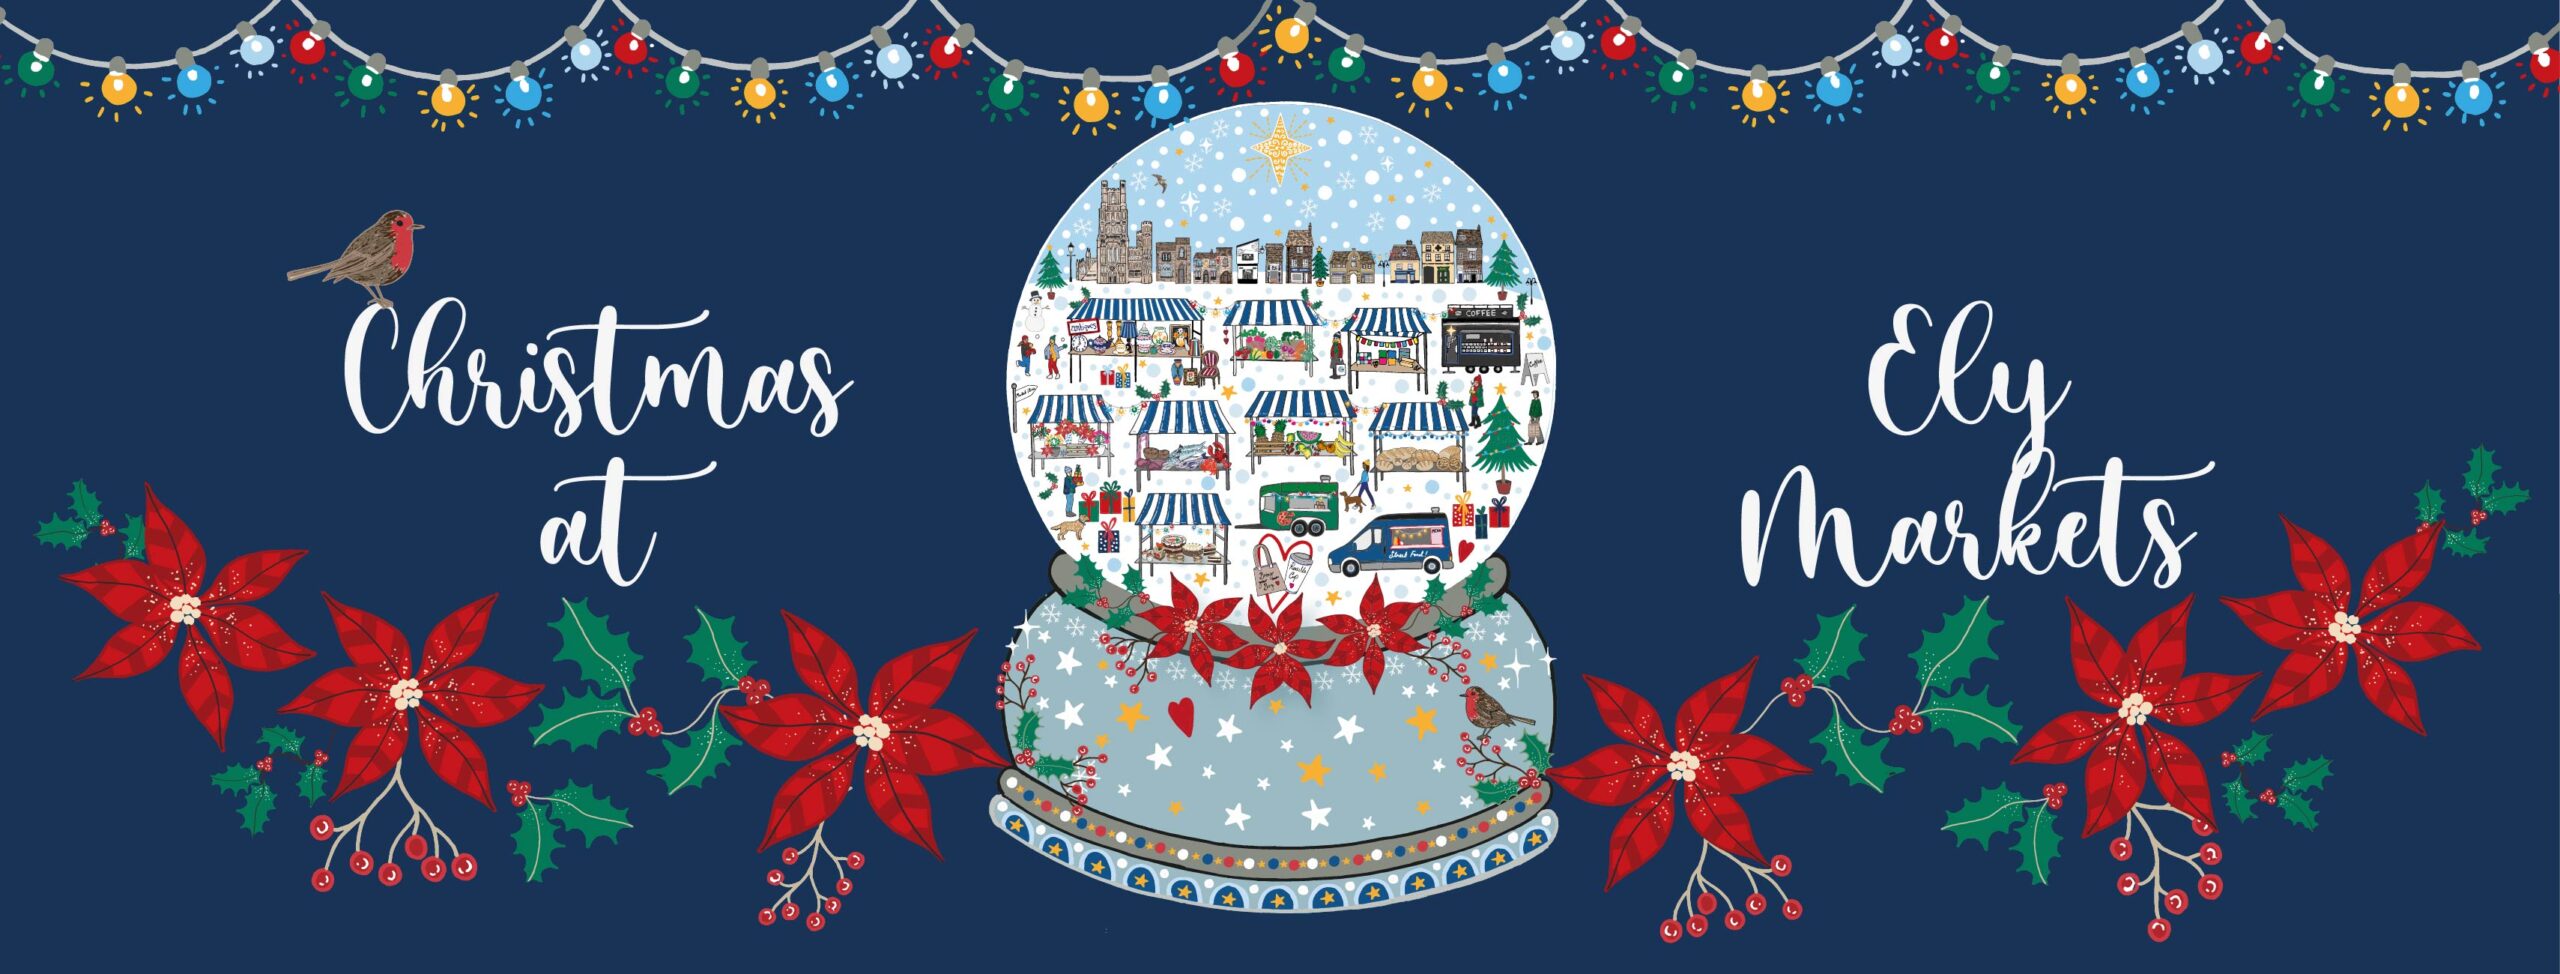 Christmas at Ely market banner